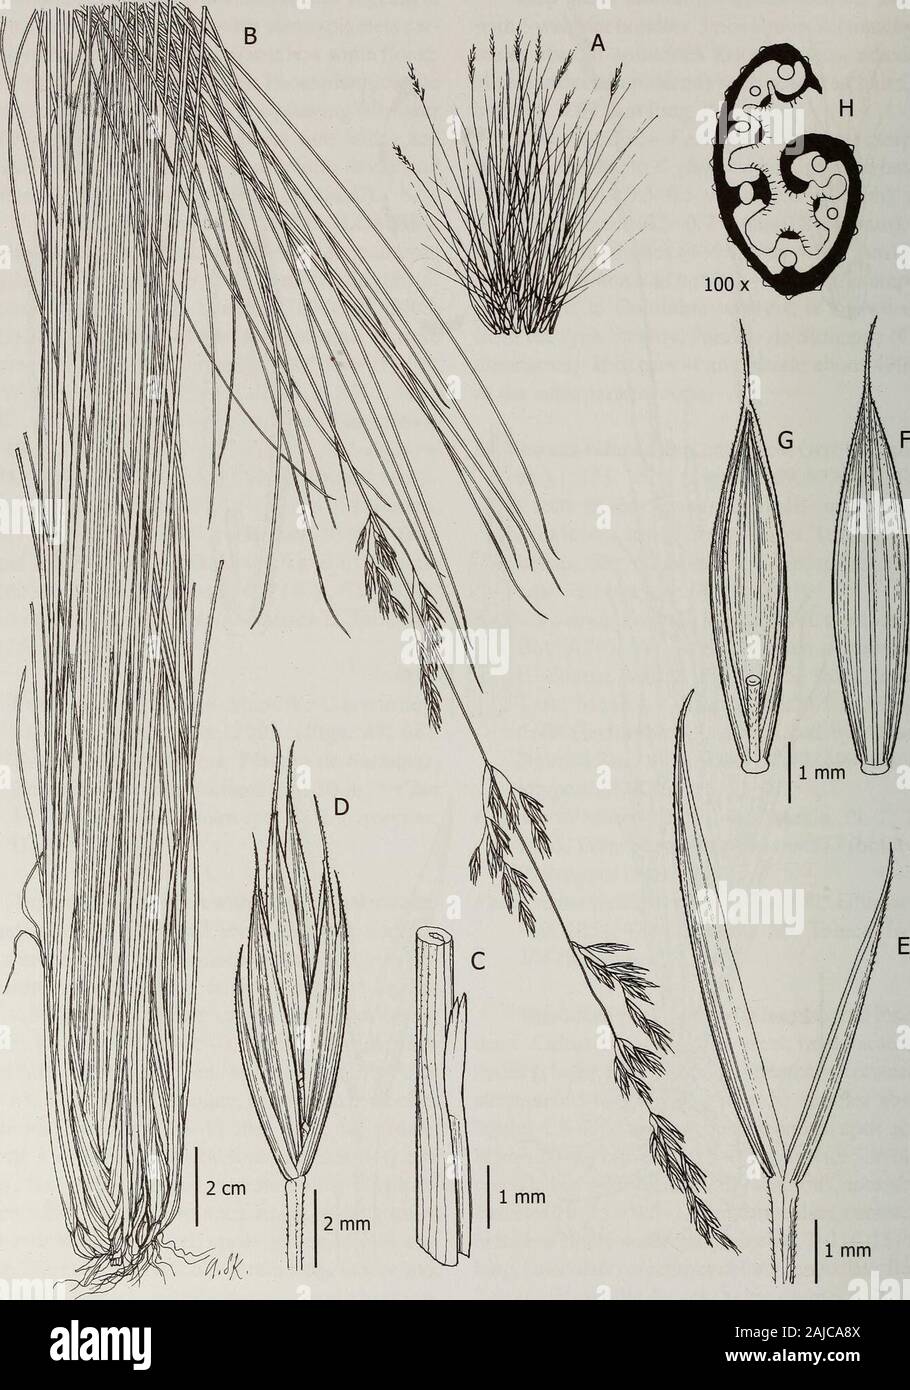 Contributions from the United States National Herbarium . Figure 68. Festuca sumapana. A. Stylized growth form. B. Habit. C. Ligule. D. Spikelet. E. Glumes. F. Lemma. G. Lemma withpalea and rachilla. H. Leaf blade cross-section. A-H, Clee/7930 (COL). 138 Festuca in South American Paramos. 1 mm Figure 69. Festuca tolucensis subsp. tolucensis. A. Stylized growth form. B. Habit. C. Ligule. D. Spikelet. E. Glumes. F. Lemma.G. Lemma with palea and rachilla. H. Leaf blade cross-section. A-H, Stancik 4279 (PRC). Festuca in South American Paramos 139 awned, the awn 1-1.5 mm long; callus glabrous;palea Stock Photo